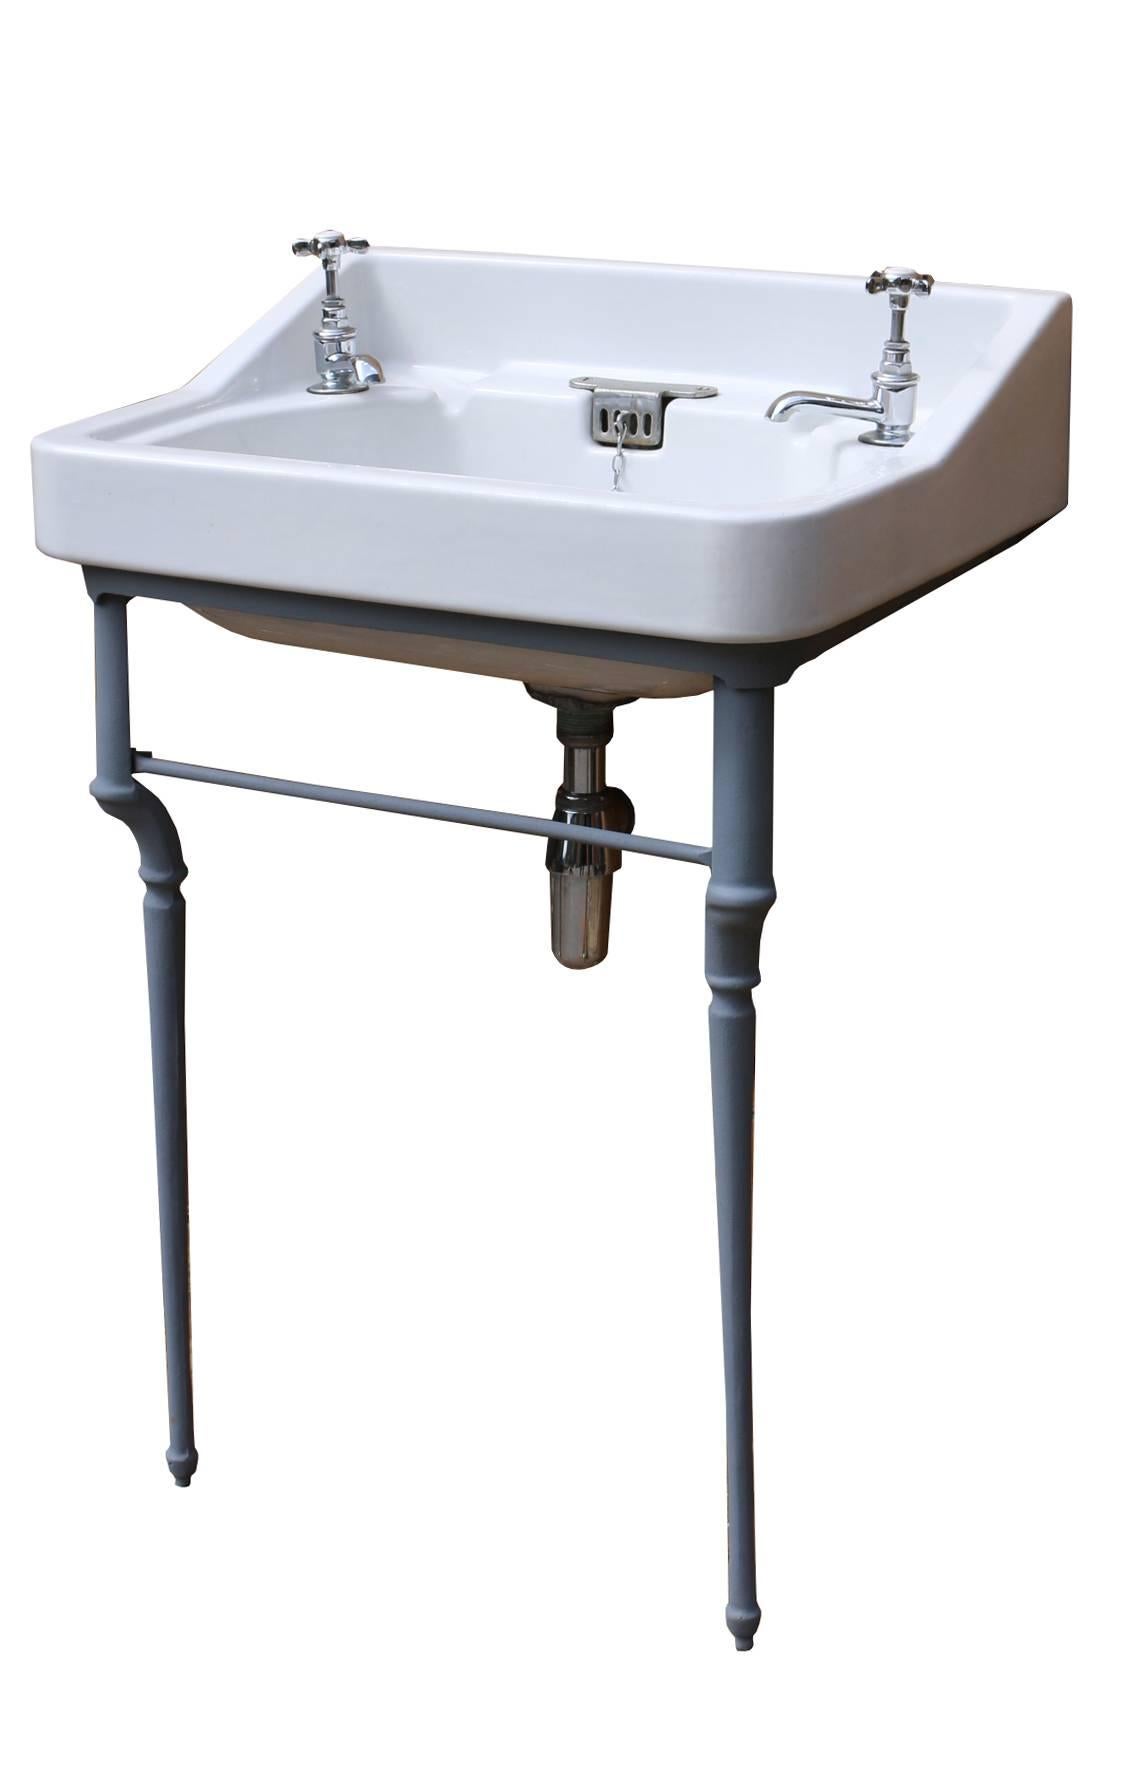 This basin has ‘Leroy Brooks Limited’ taps and is in good condition for its age with a small area of damage behind the taps. The stand is in excellent condition.
Please note that the bracket needs 3.5 cm of packing between the wall and the